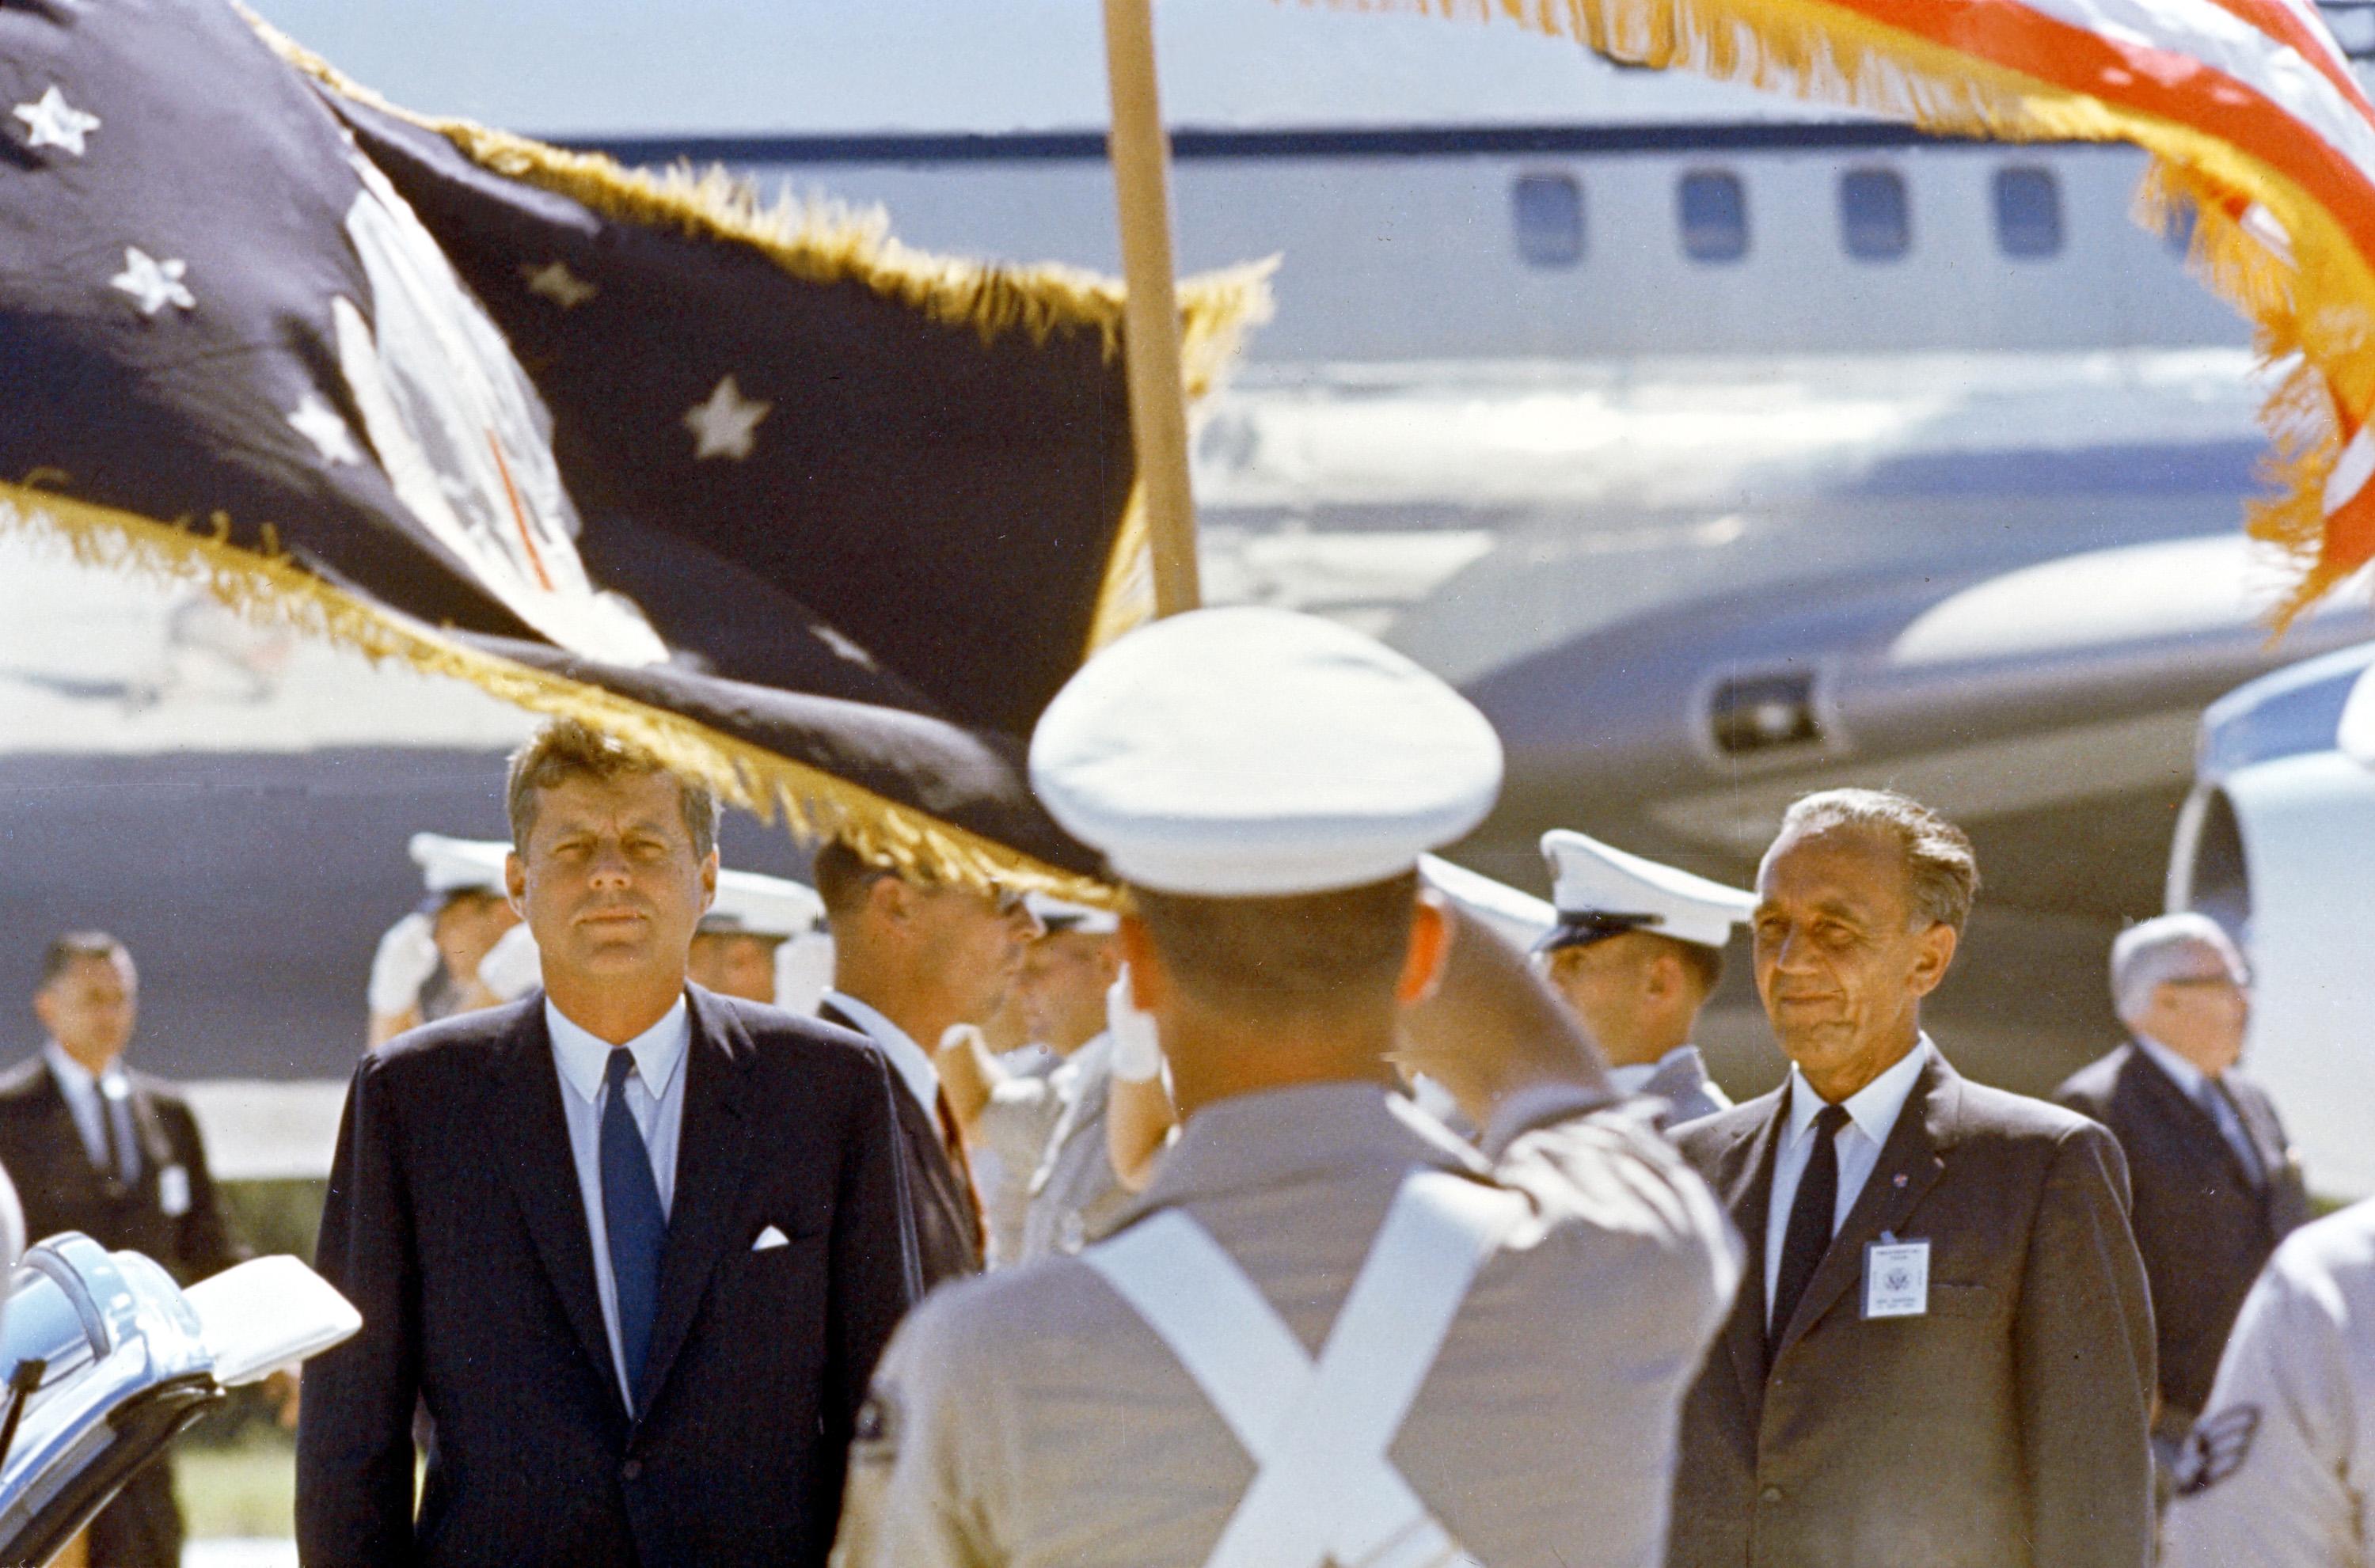 On Sept. 11, 1962, President John F. Kennedy is welcomed by a color guard and Center Director Kurt Debus (right). An airplane appears in the background.